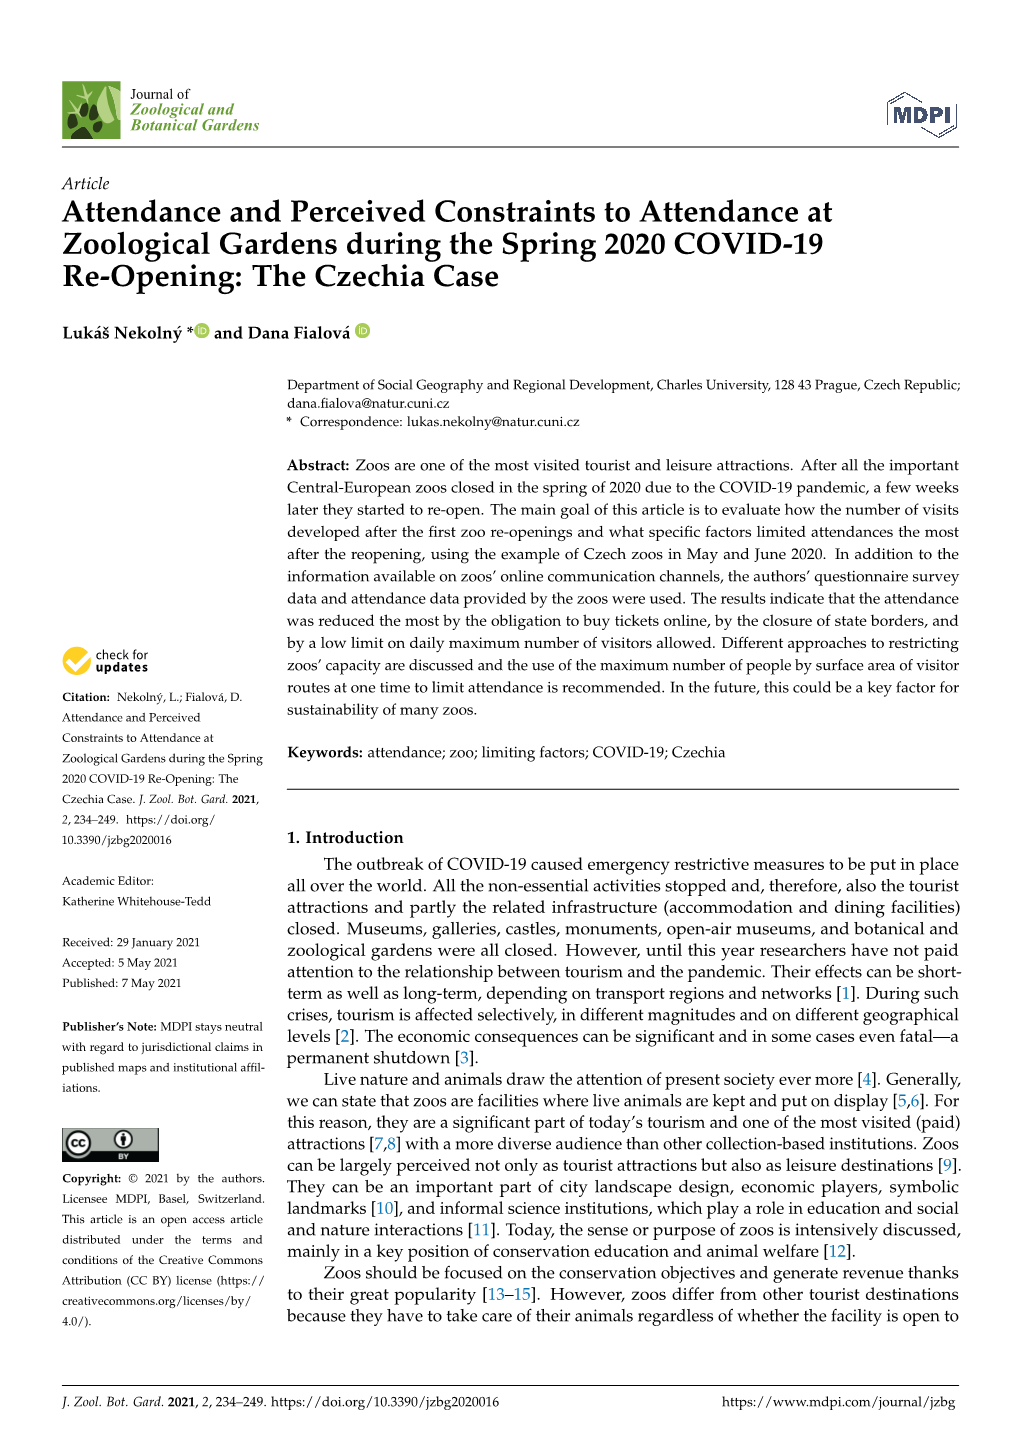 Attendance and Perceived Constraints to Attendance at Zoological Gardens During the Spring 2020 COVID-19 Re-Opening: the Czechia Case